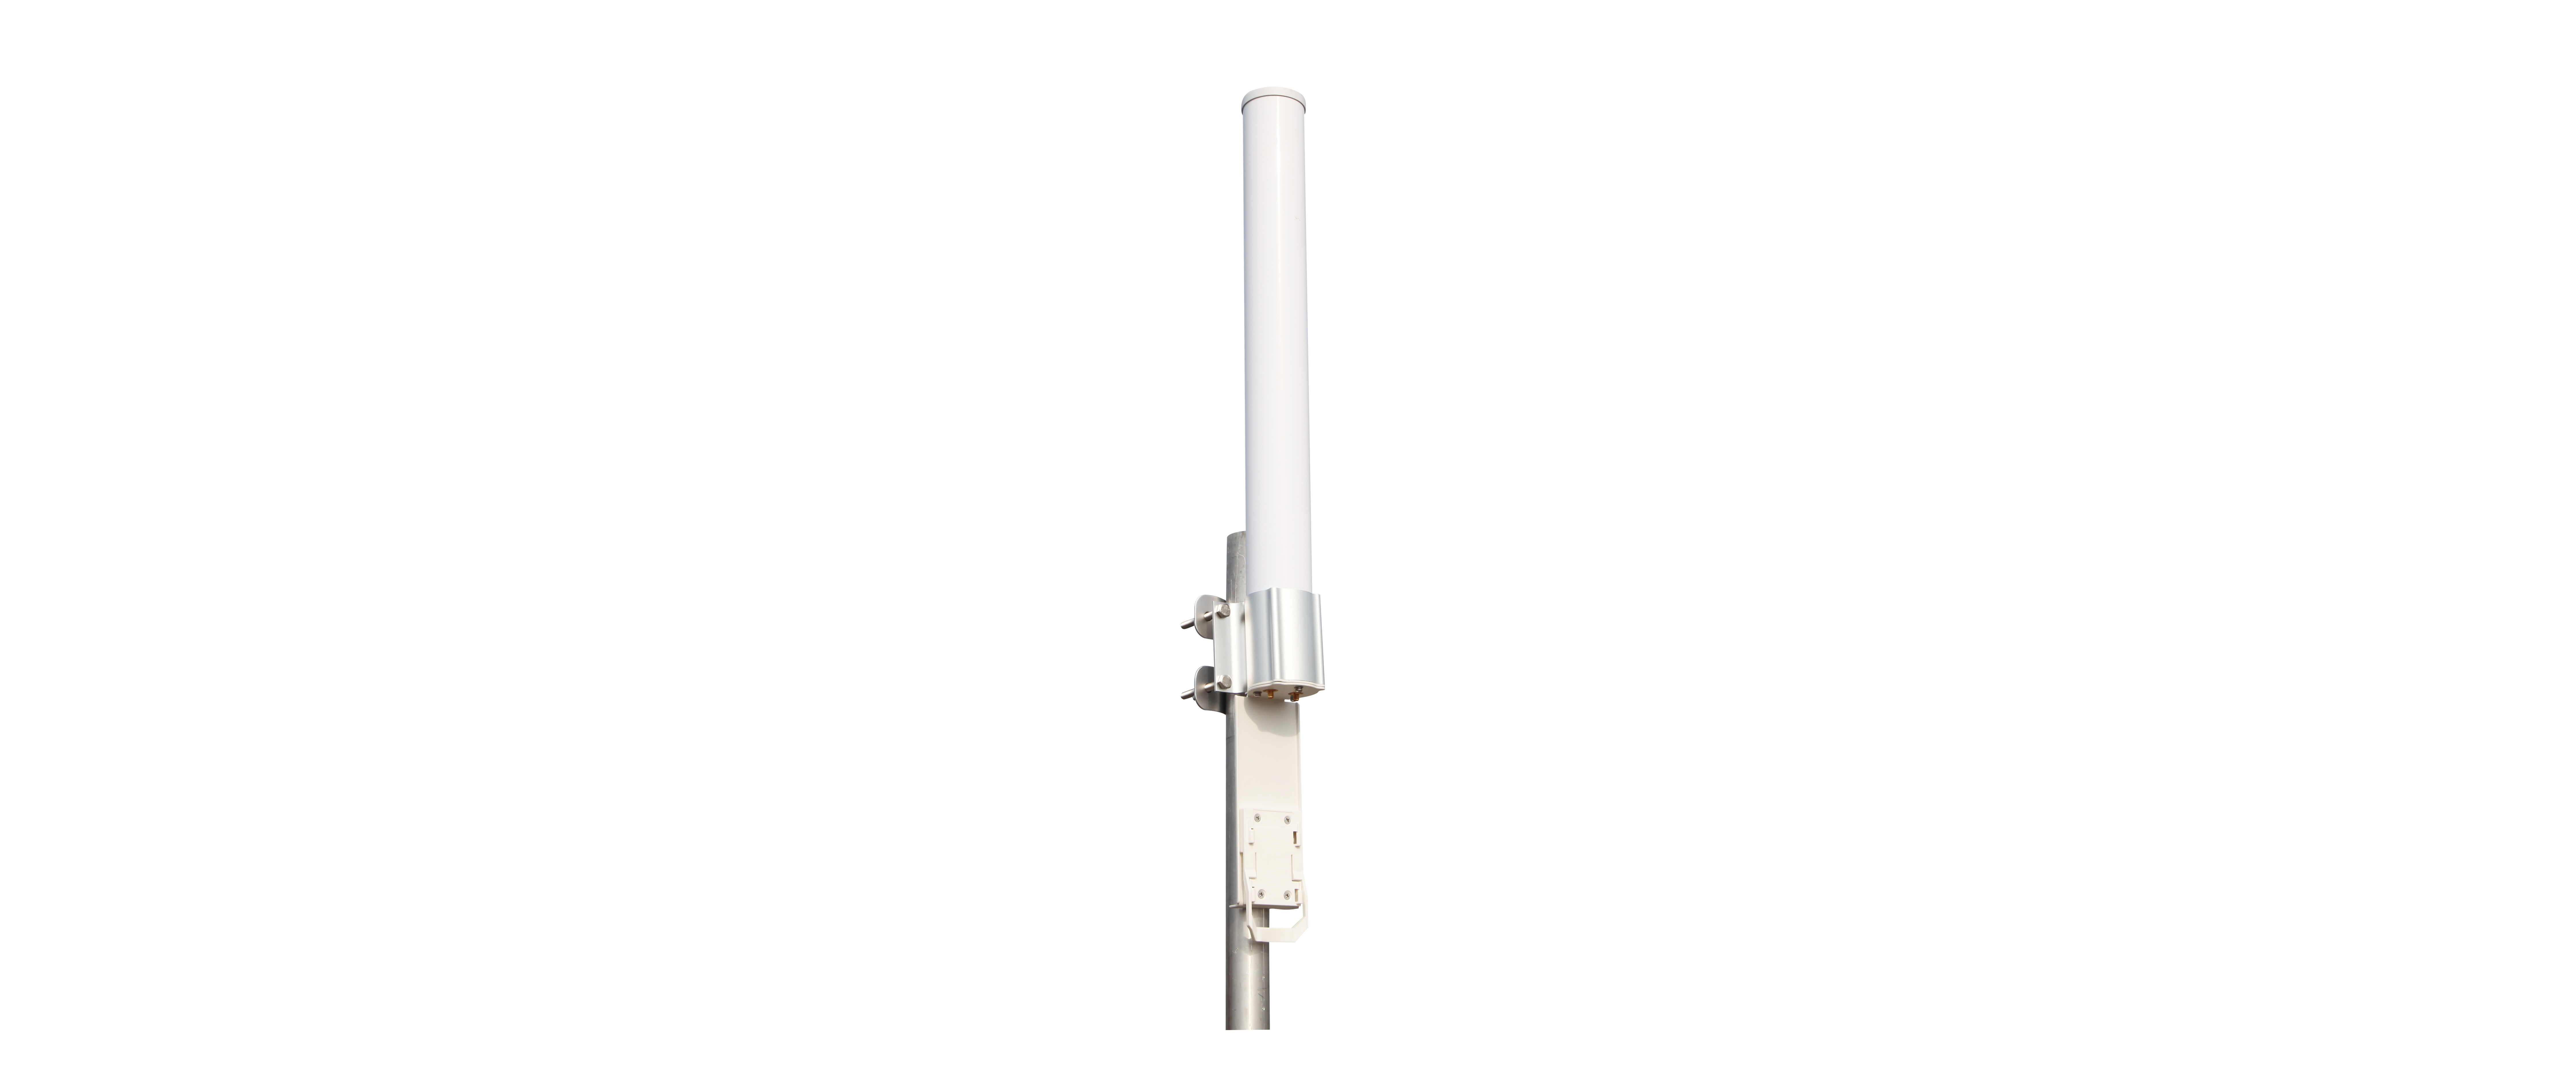 IP-COM 5GHz DUAL POLARIZATION OMNI DIRECTIONAL BASE STATION ANTENNA 2 x RPSMA CONNECTORS 5100-5850MHz POLE MOUNTED WHITE SUITS BS9 BASE STATION